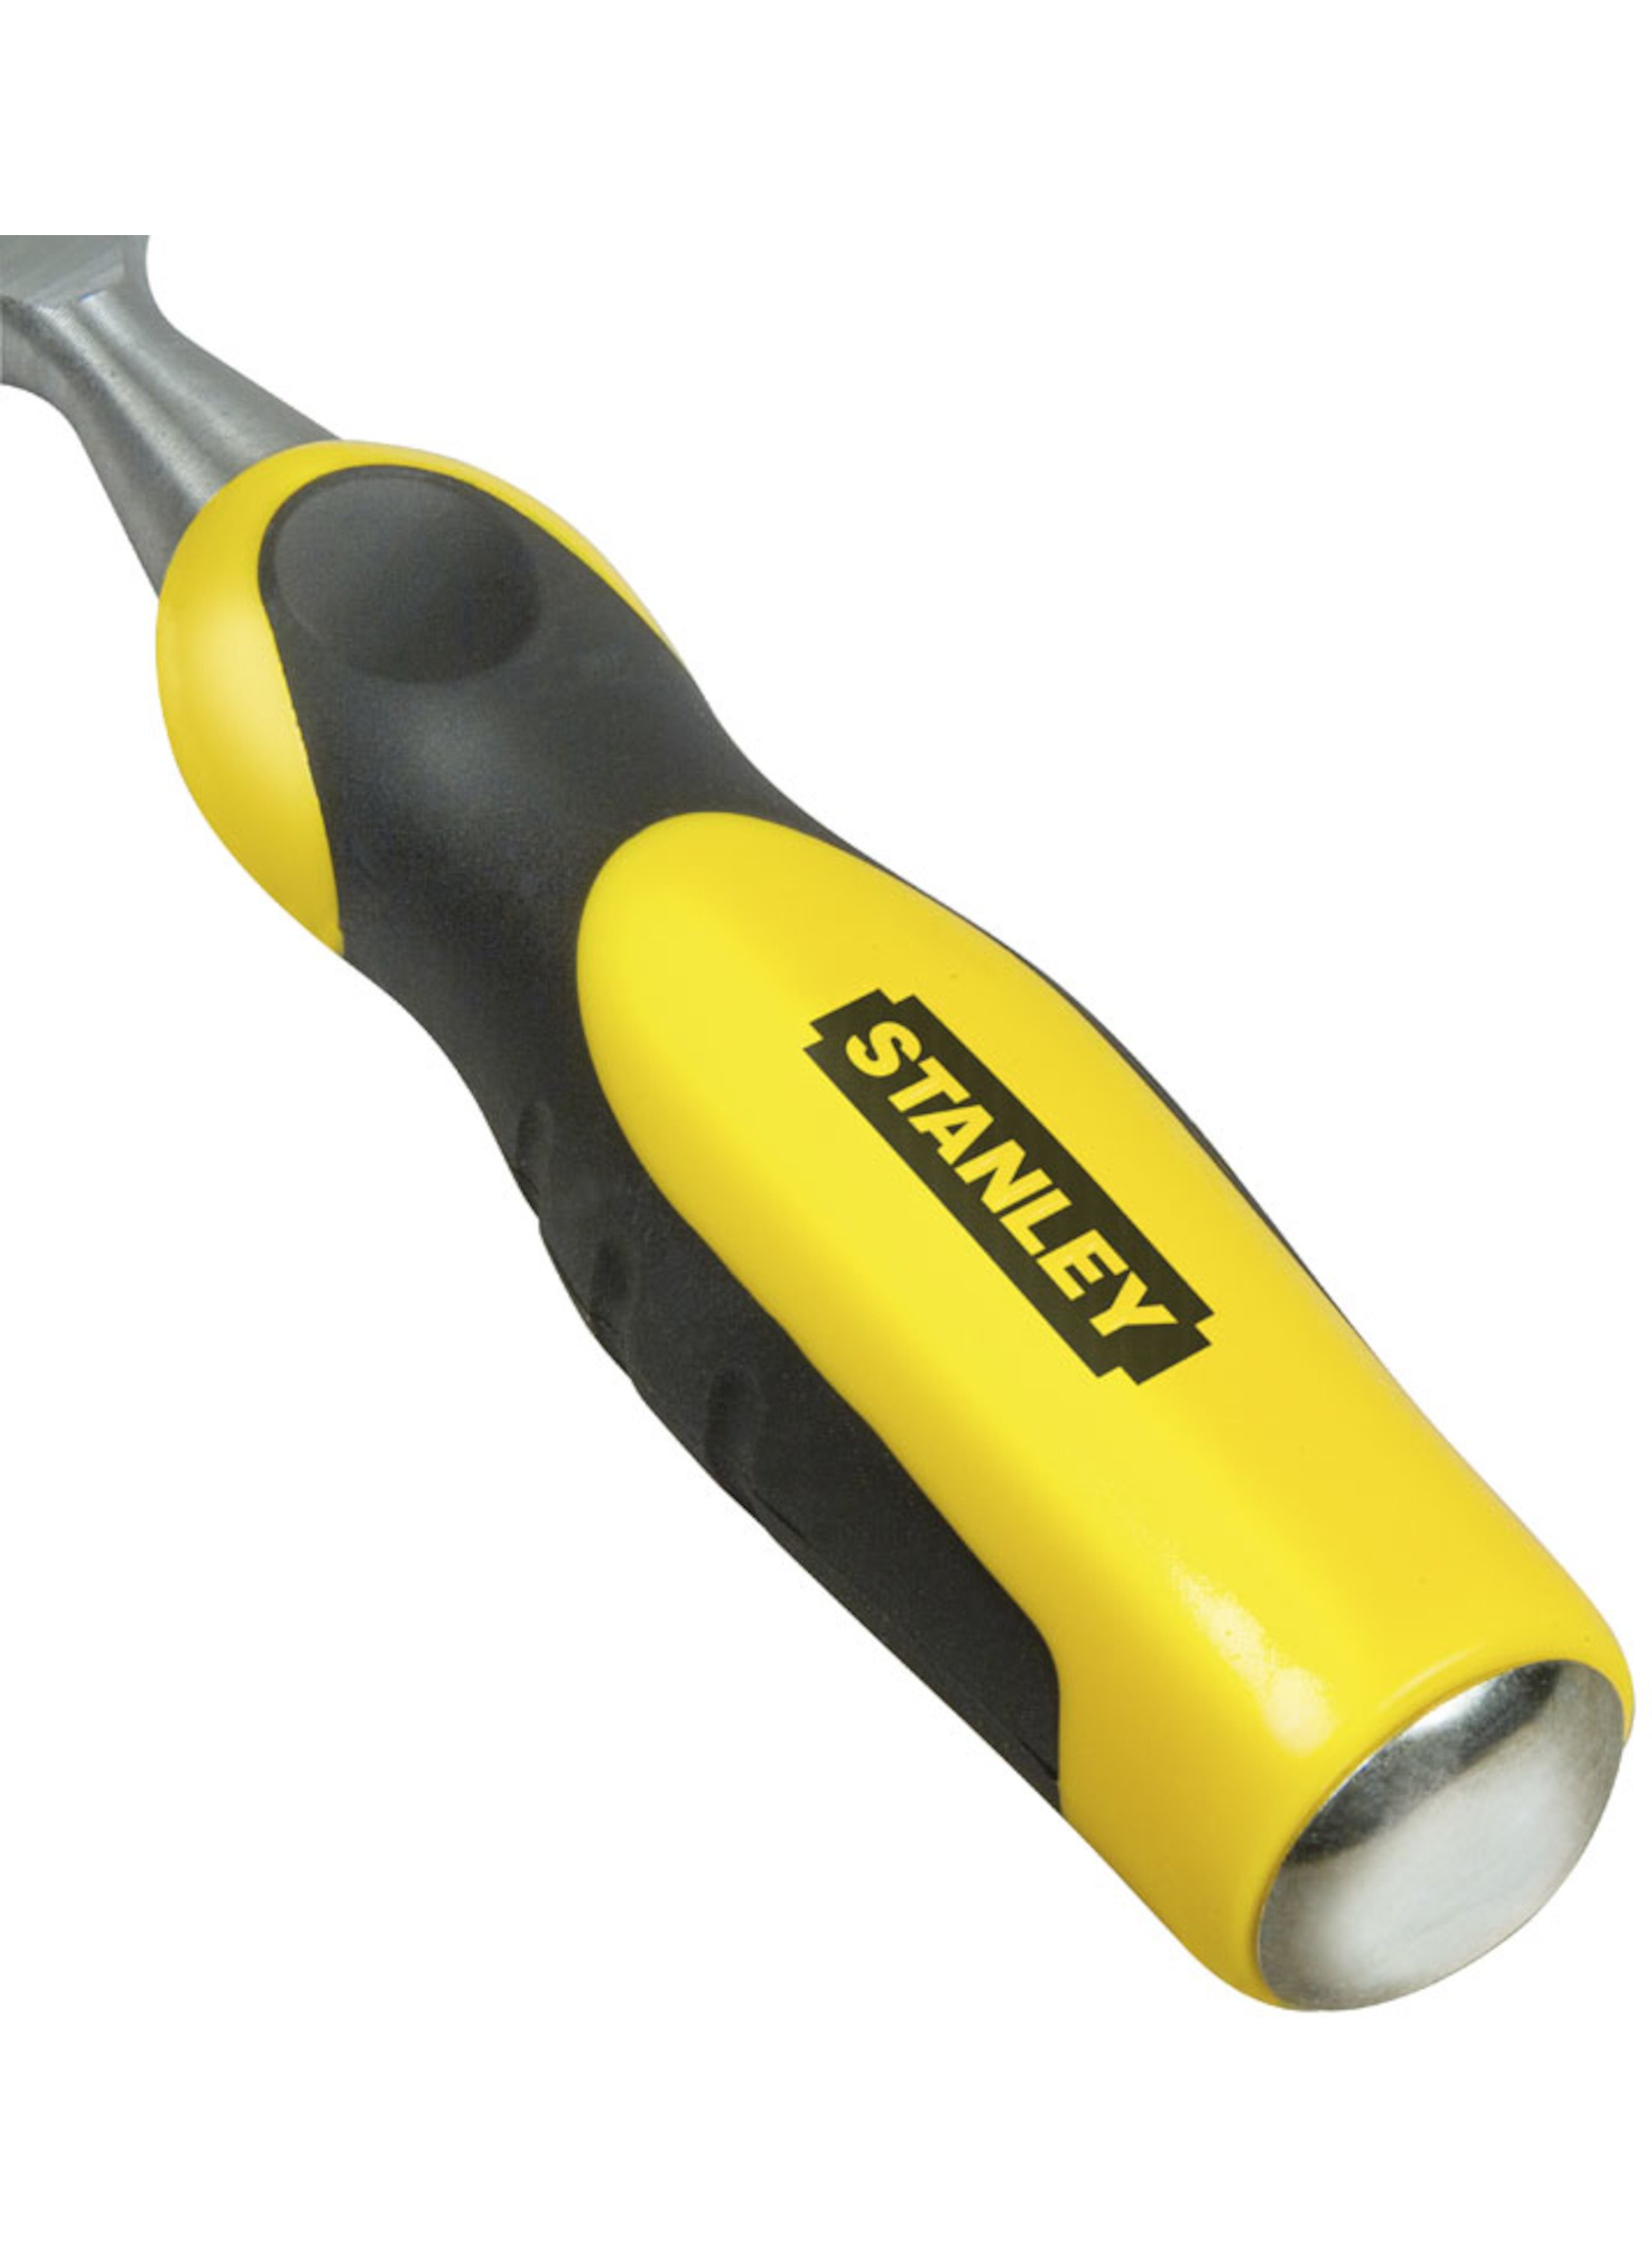 Wood Chisels 8mm Stanley - 2